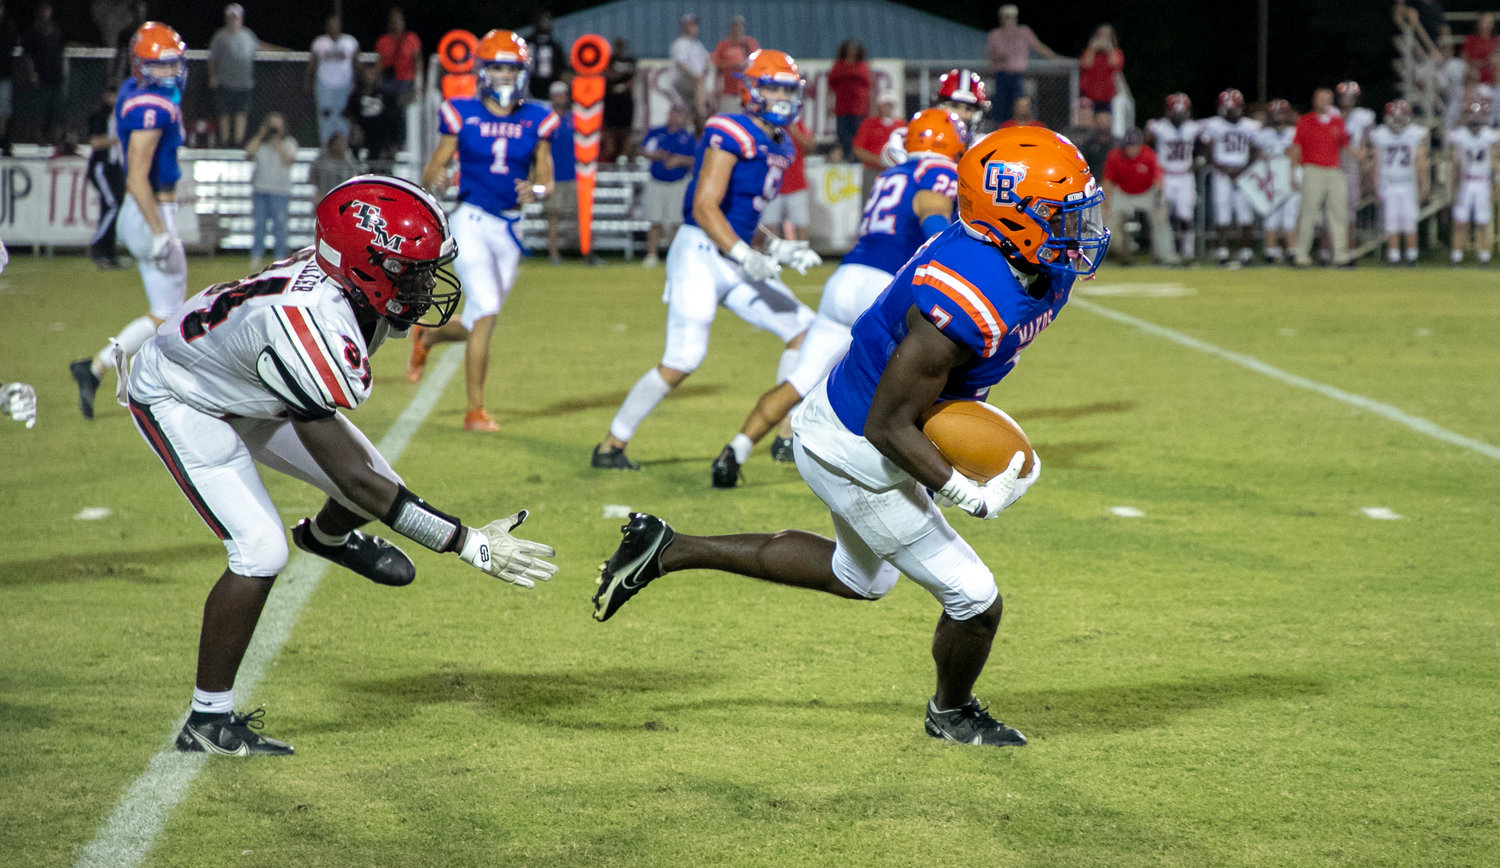 Mako senior Chris Pearson breaks off a long kickoff return against the T.R. Miller Tigers in region action at home Sept. 16. Pearson capped Orange Beach’s opening drive with a one-yard touchdown rush to open the scoring.